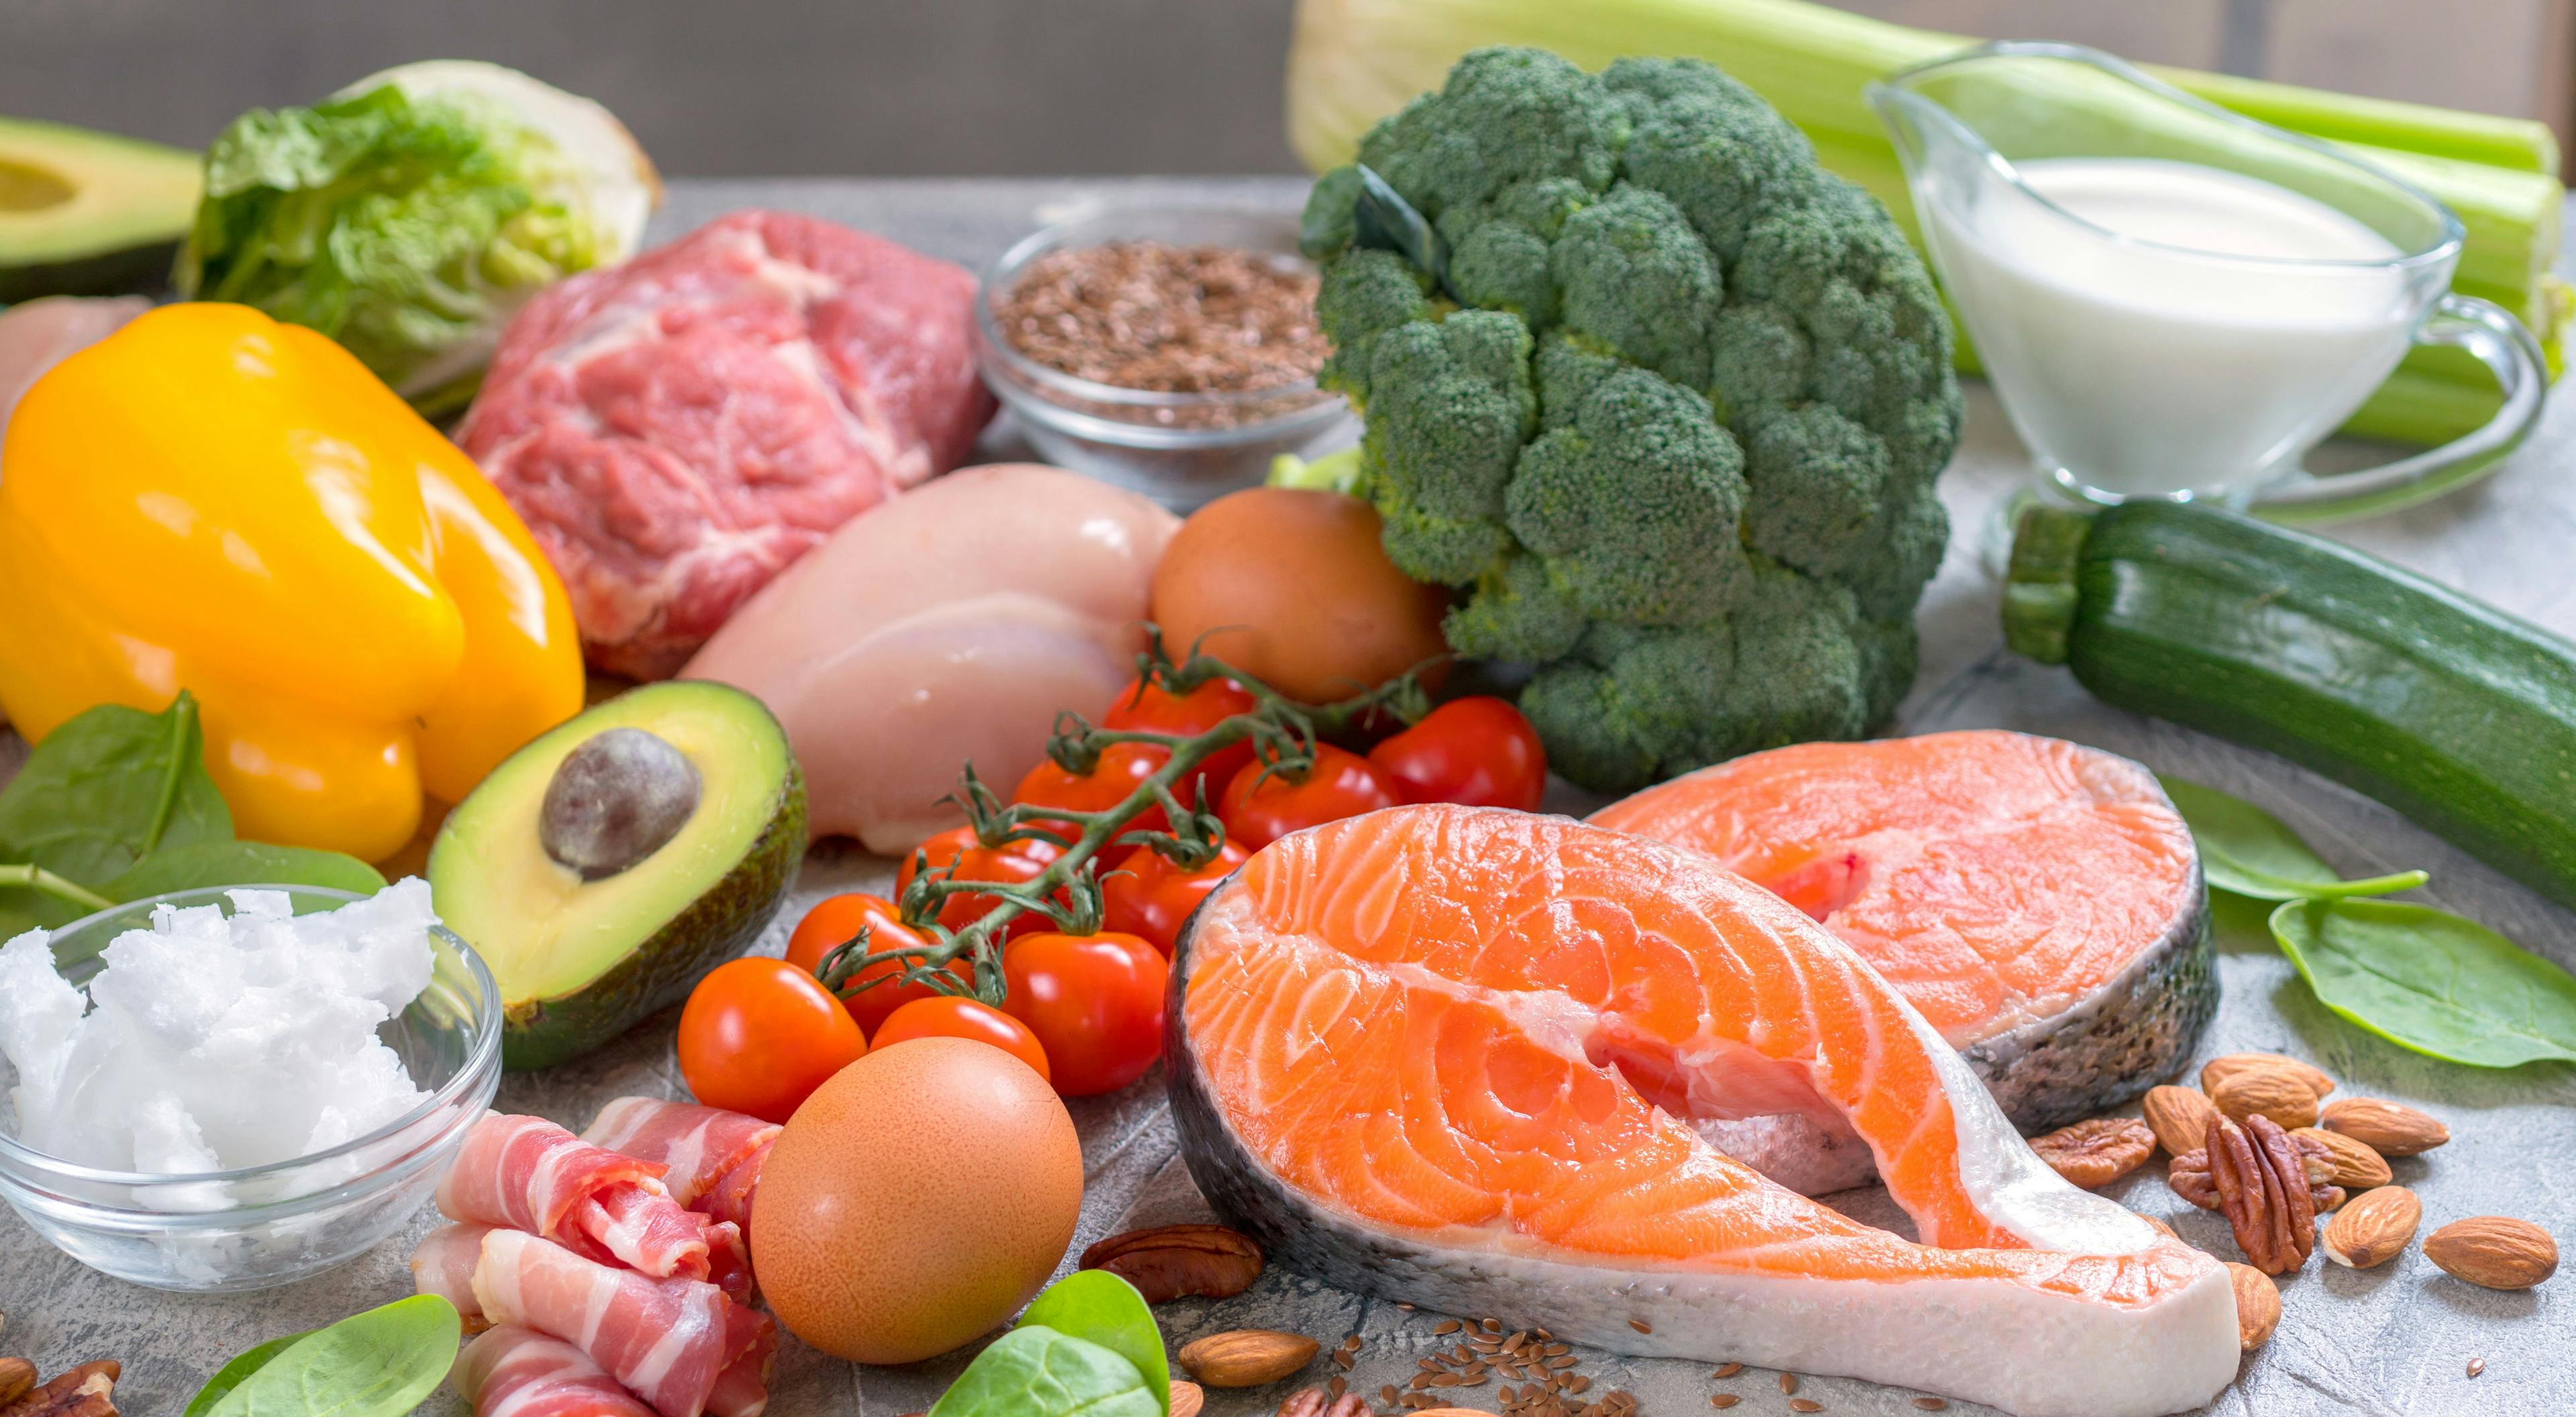 Mediterranean Diet May Boost Immunotherapy Outcomes